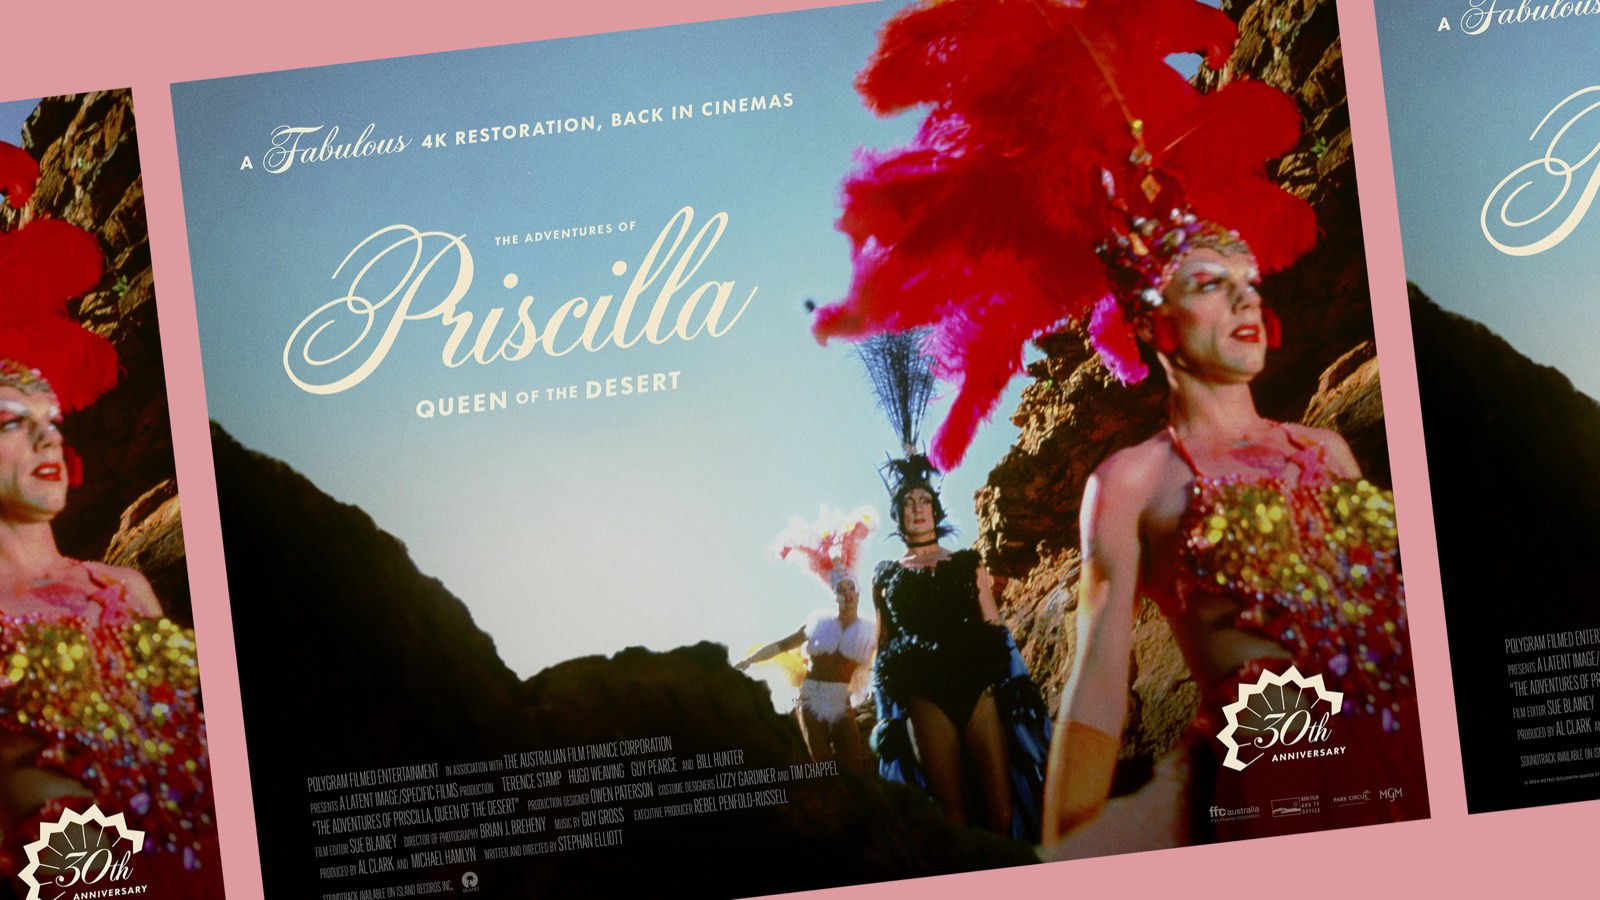 Join The Adventures of Priscilla, Queen of the Desert! New poster revealed for 30th anniversary re-release